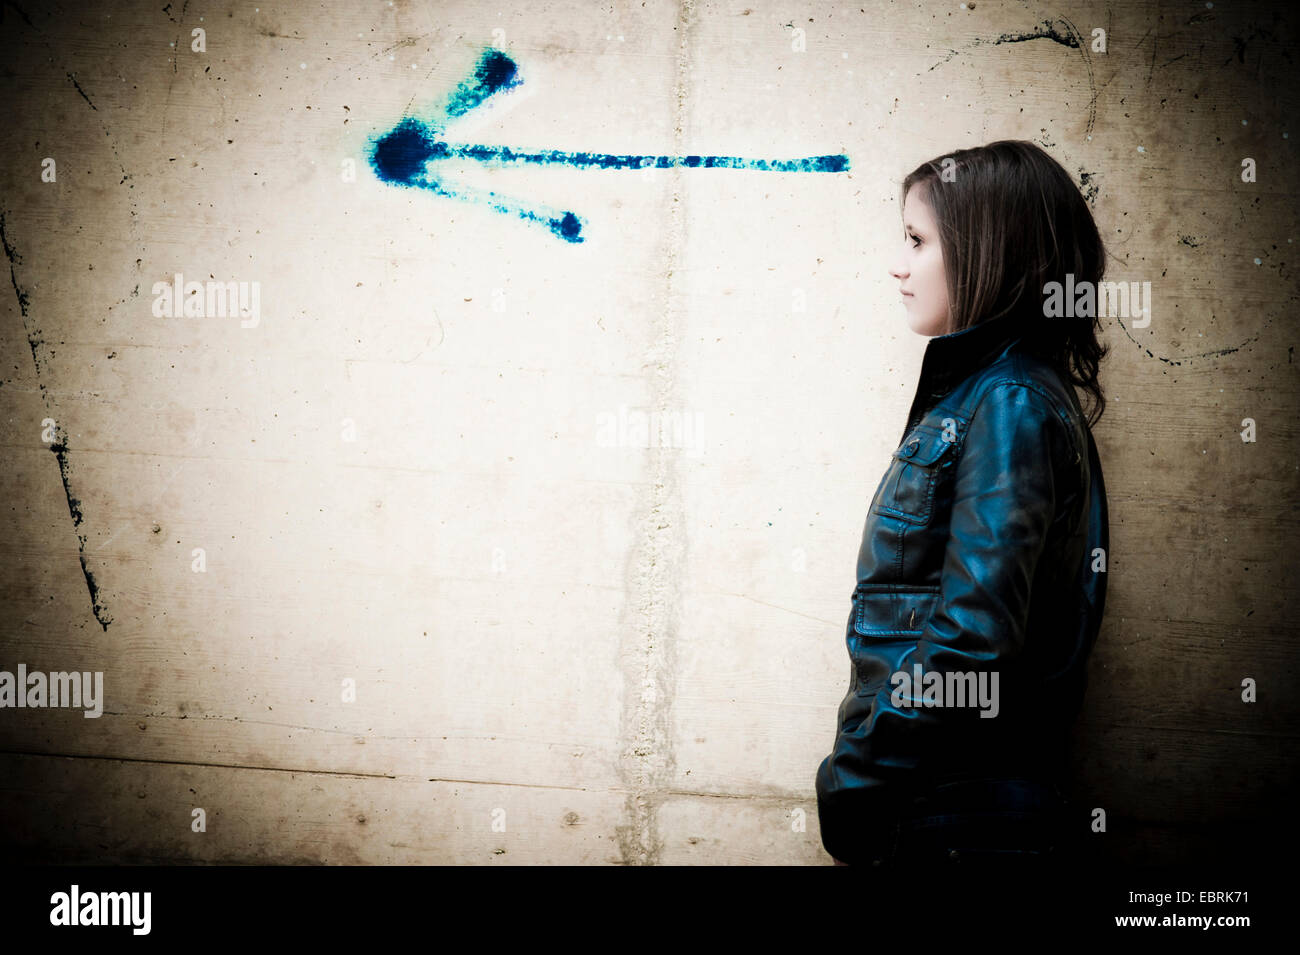 young girl standing looking into the direction of an arrow painted onto a concrete wall Stock Photo